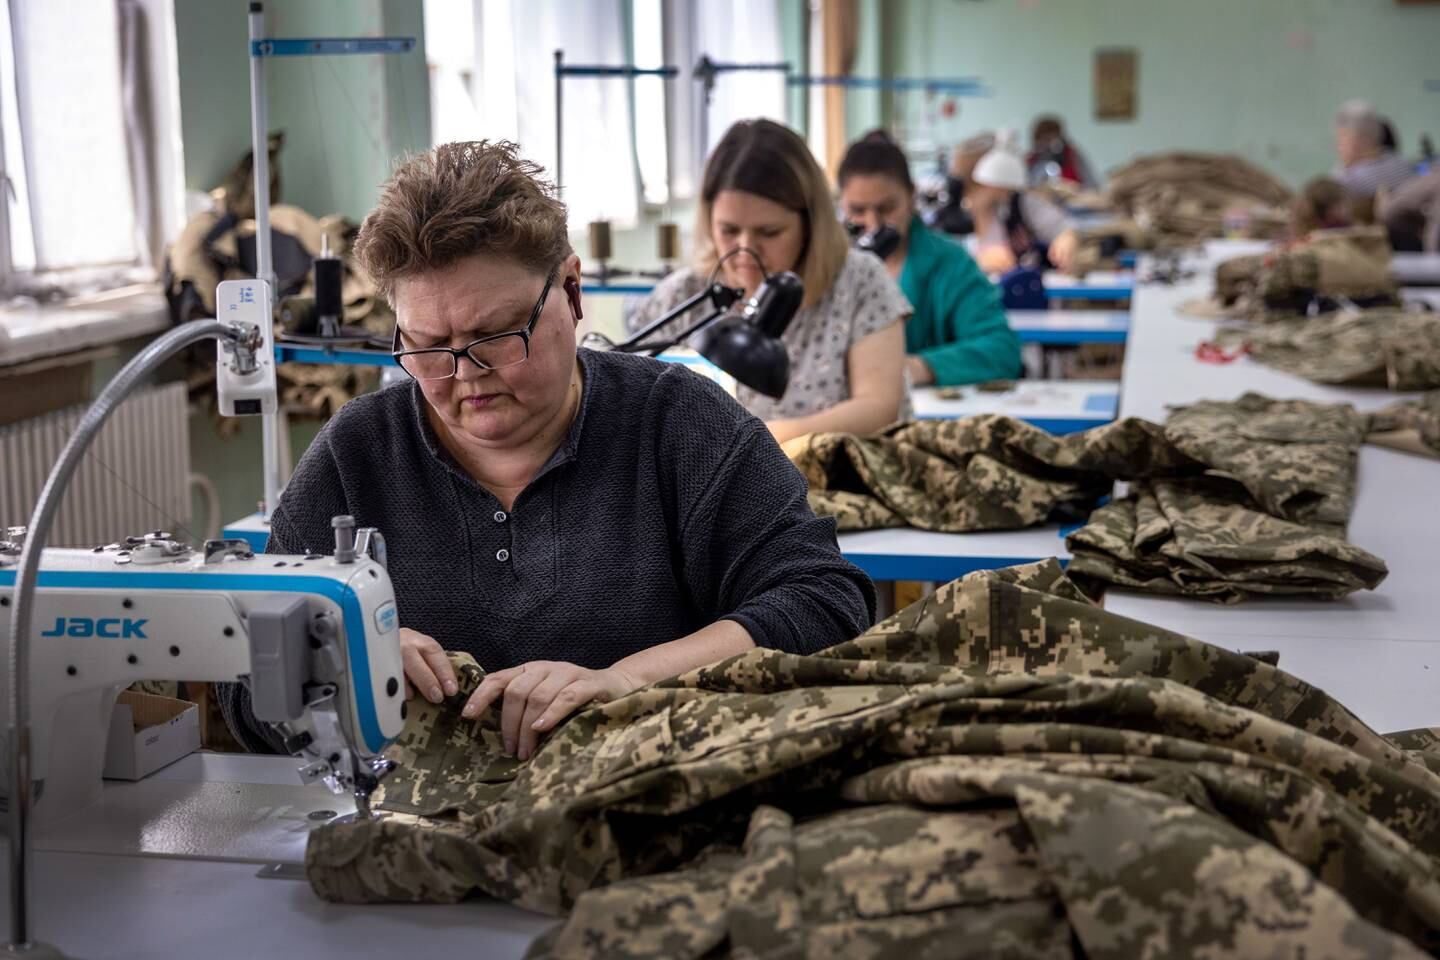 Workers sew uniforms and material for flack jackets at a military clothing factory in May in Kryvyi Rih, Ukraine. Getty